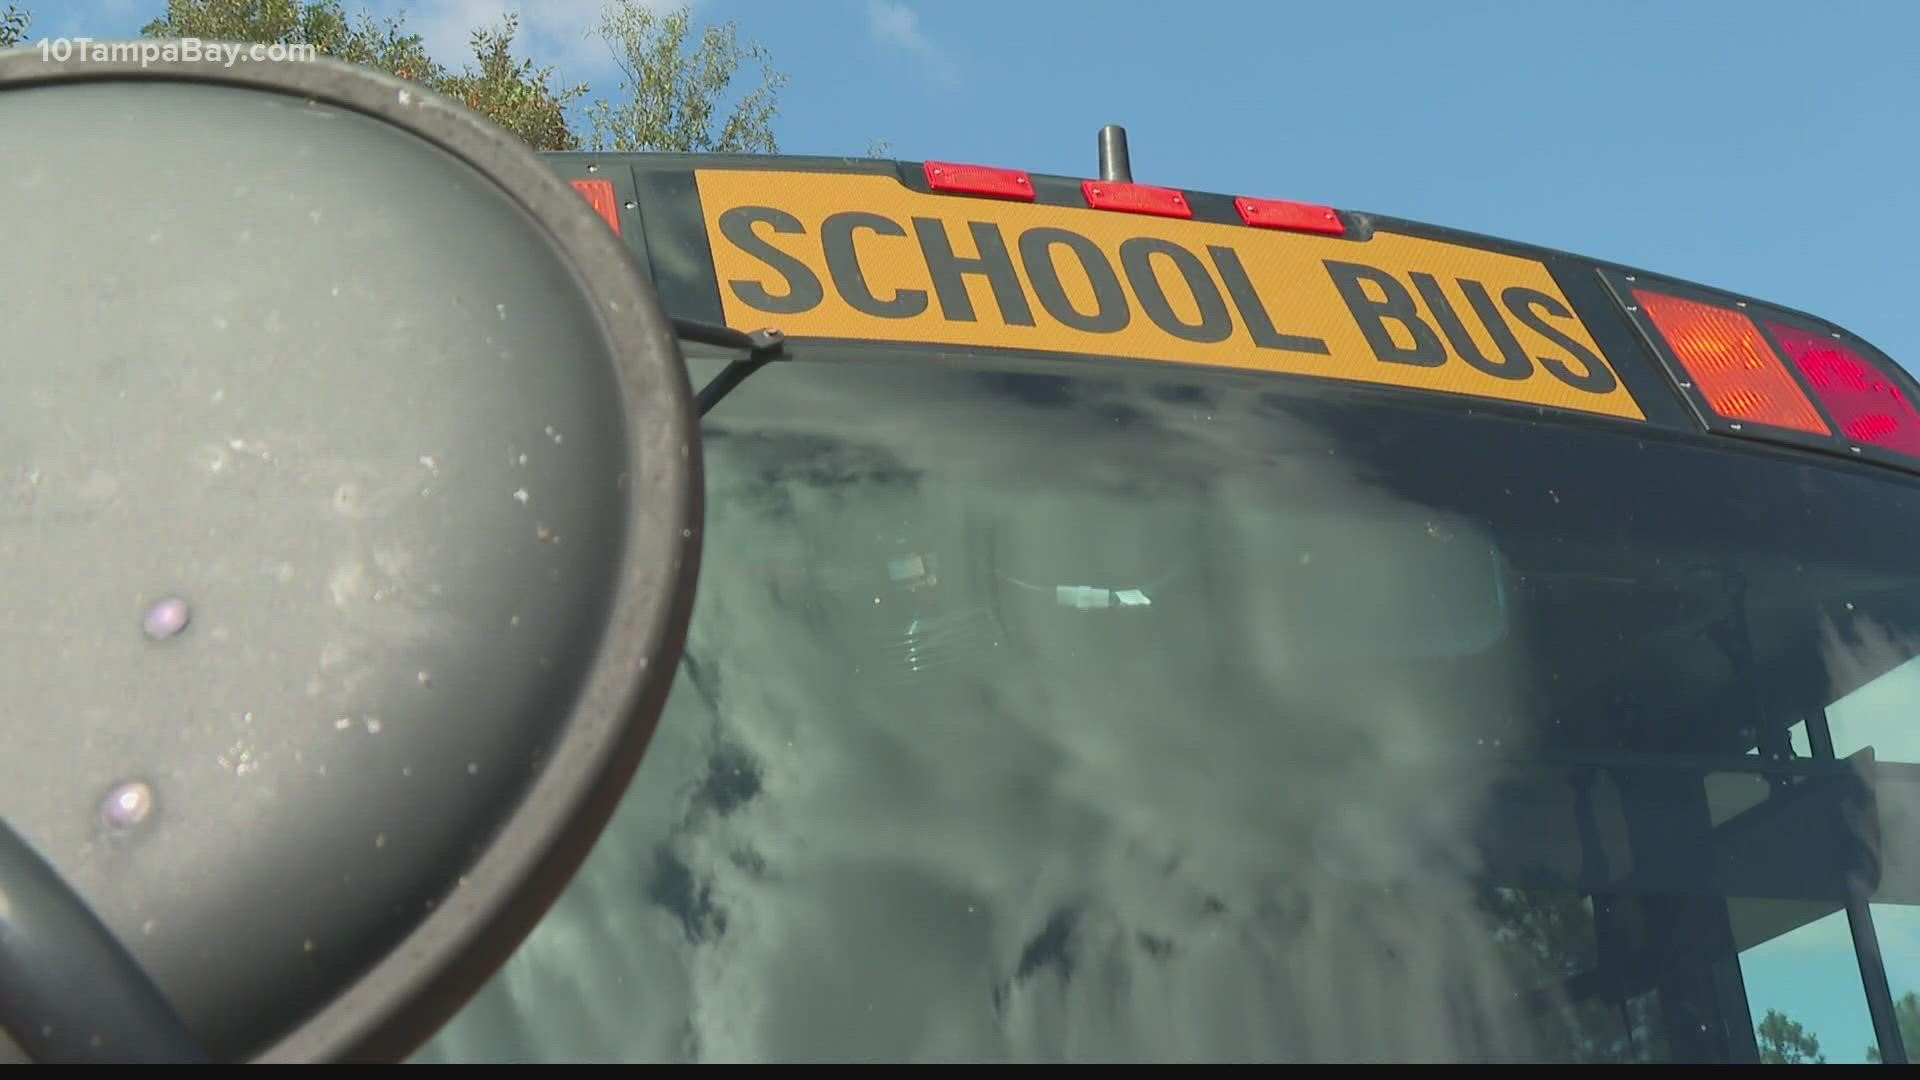 The district will adjust its school start times to accommodate for its bus driver shortage.